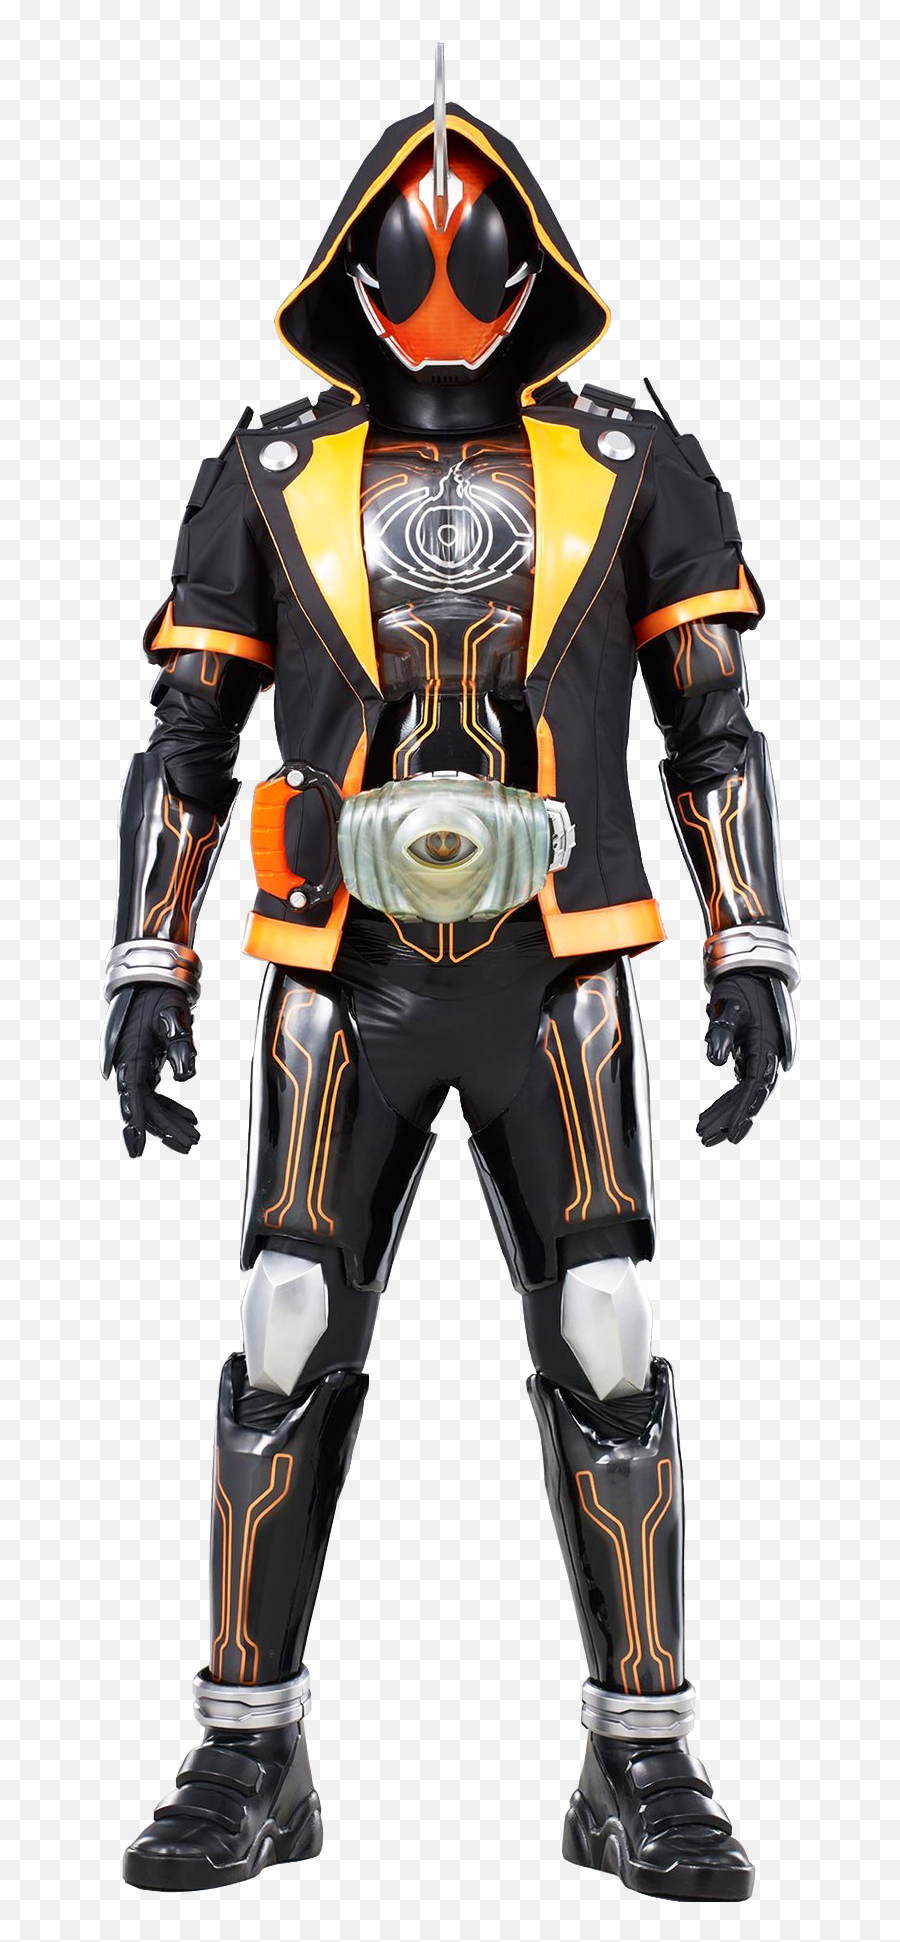 Iu0027m I The Only One Who Thinks Ghost Riders Look Cooler - Kamen Rider Revice Ghost Form Png,Icon Parahuman Helmet